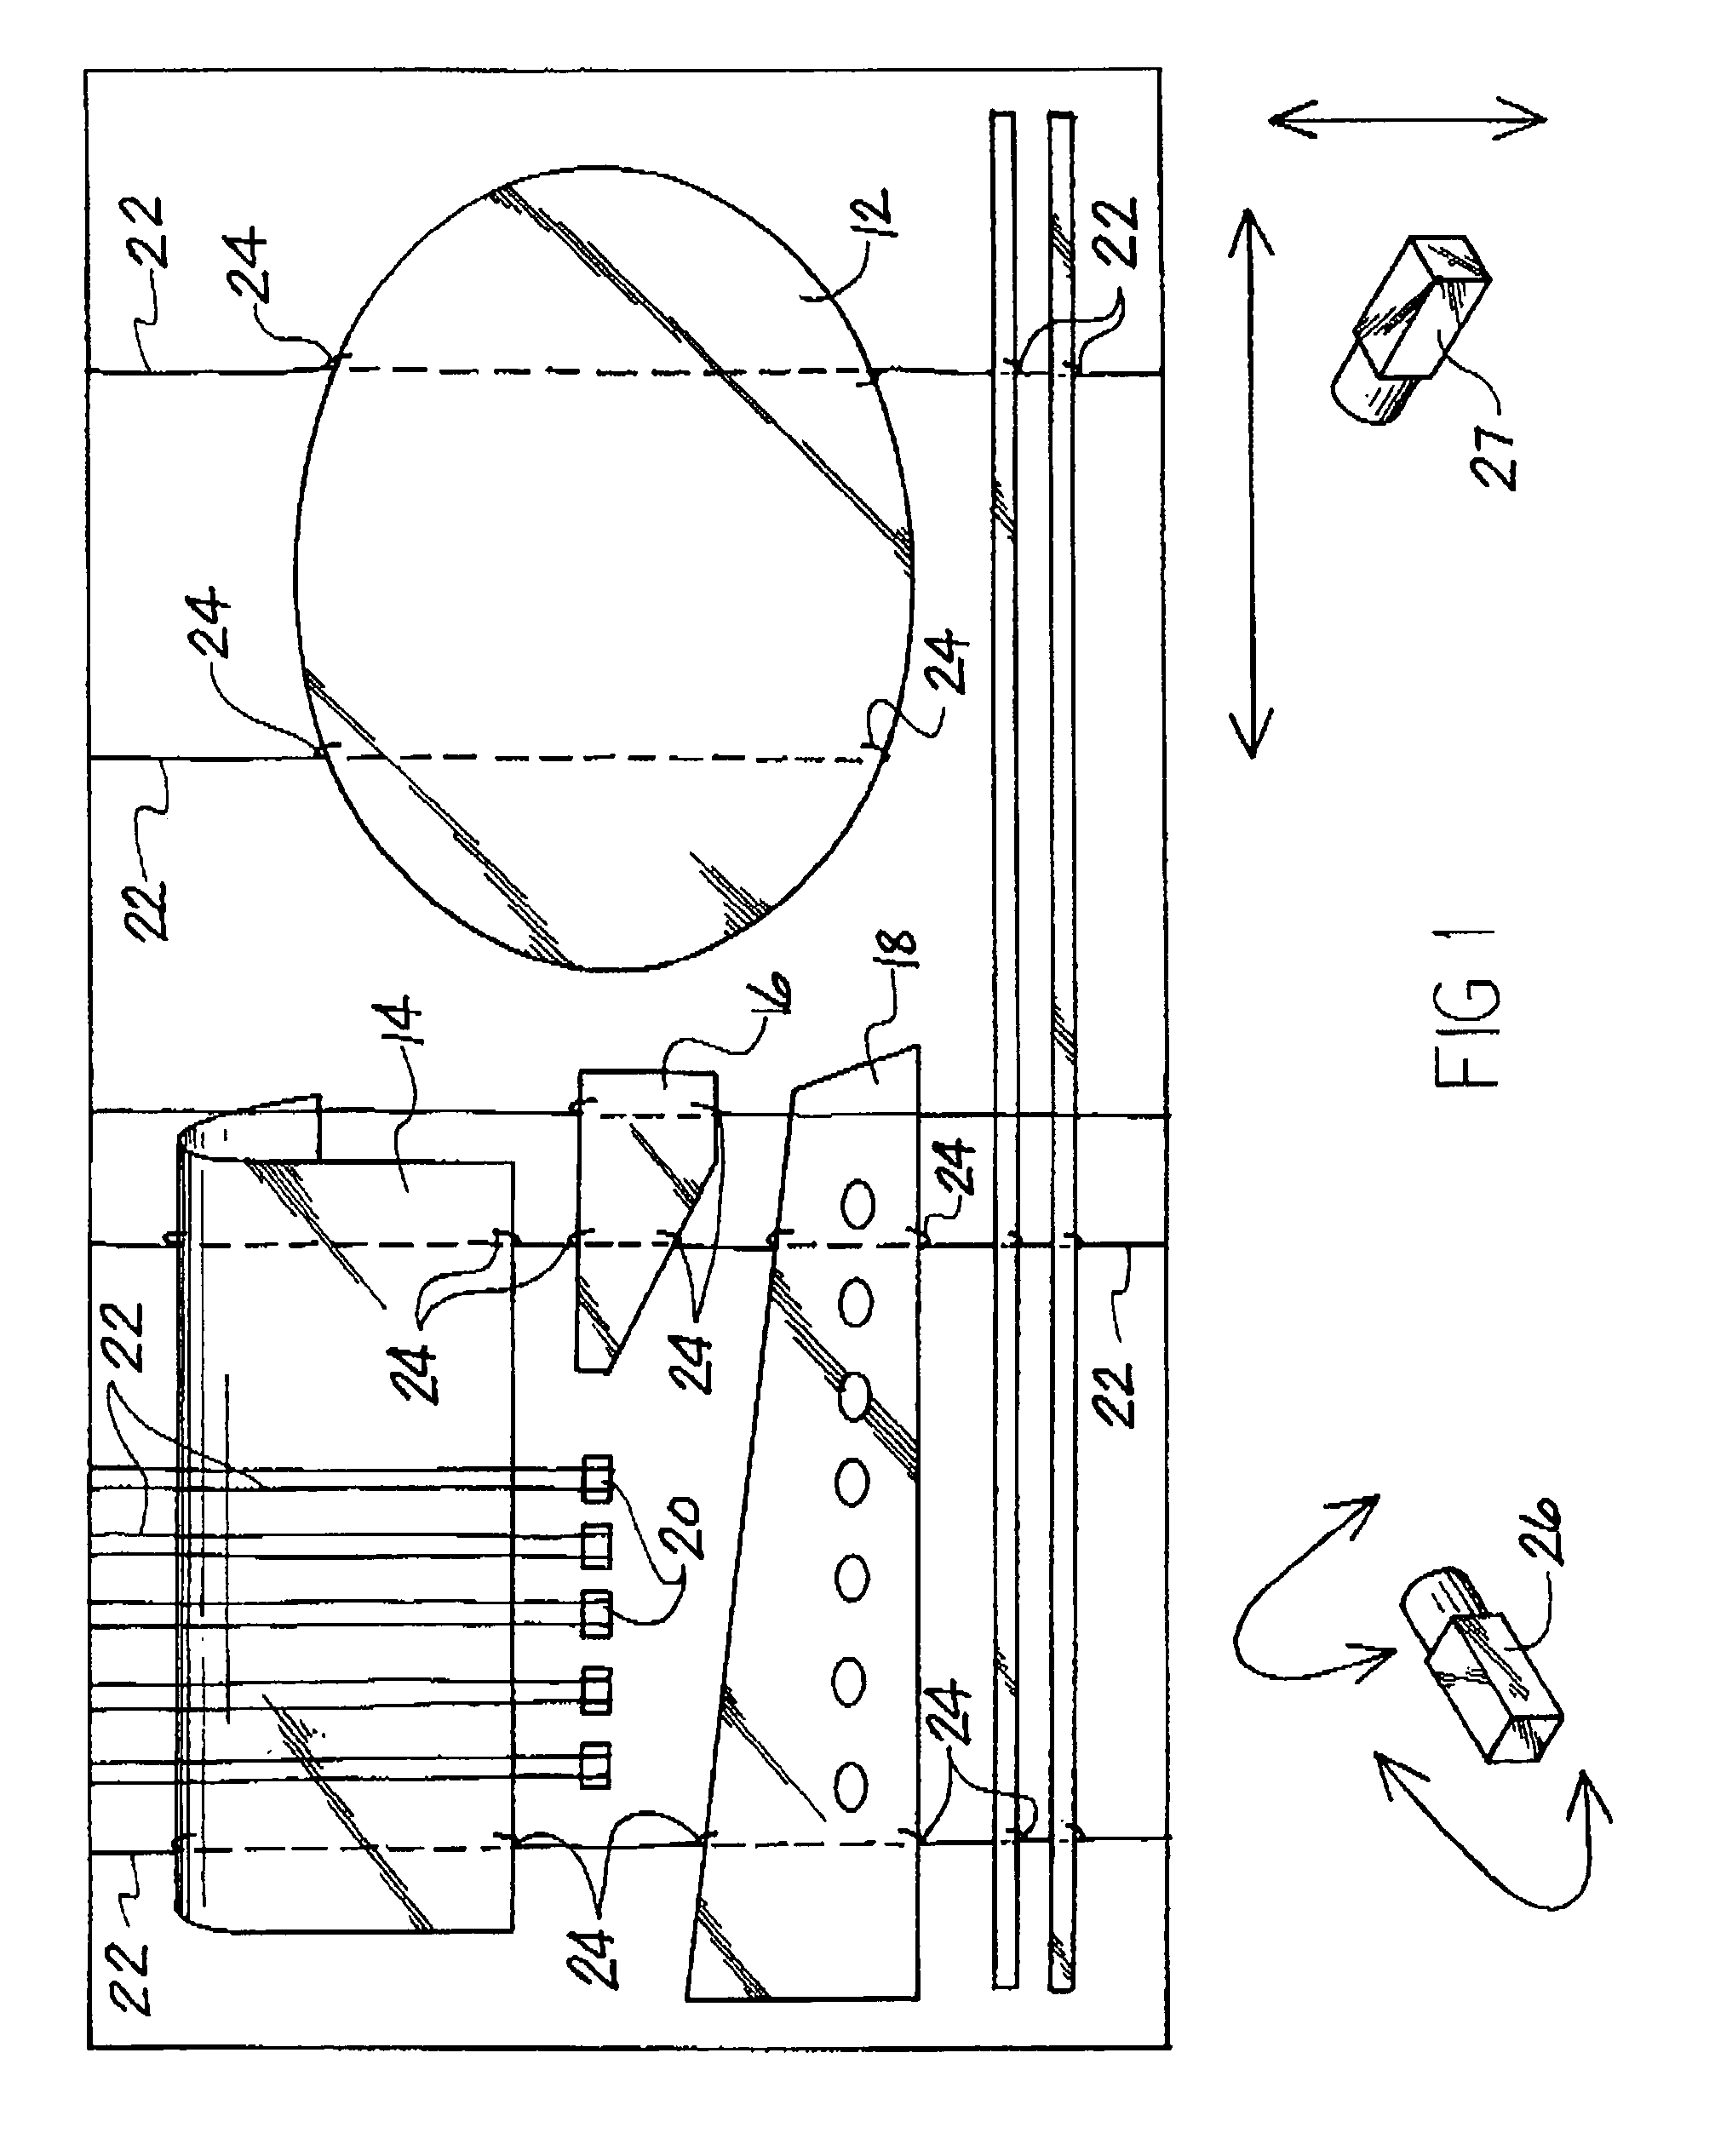 Surface contamination detection method and apparatus